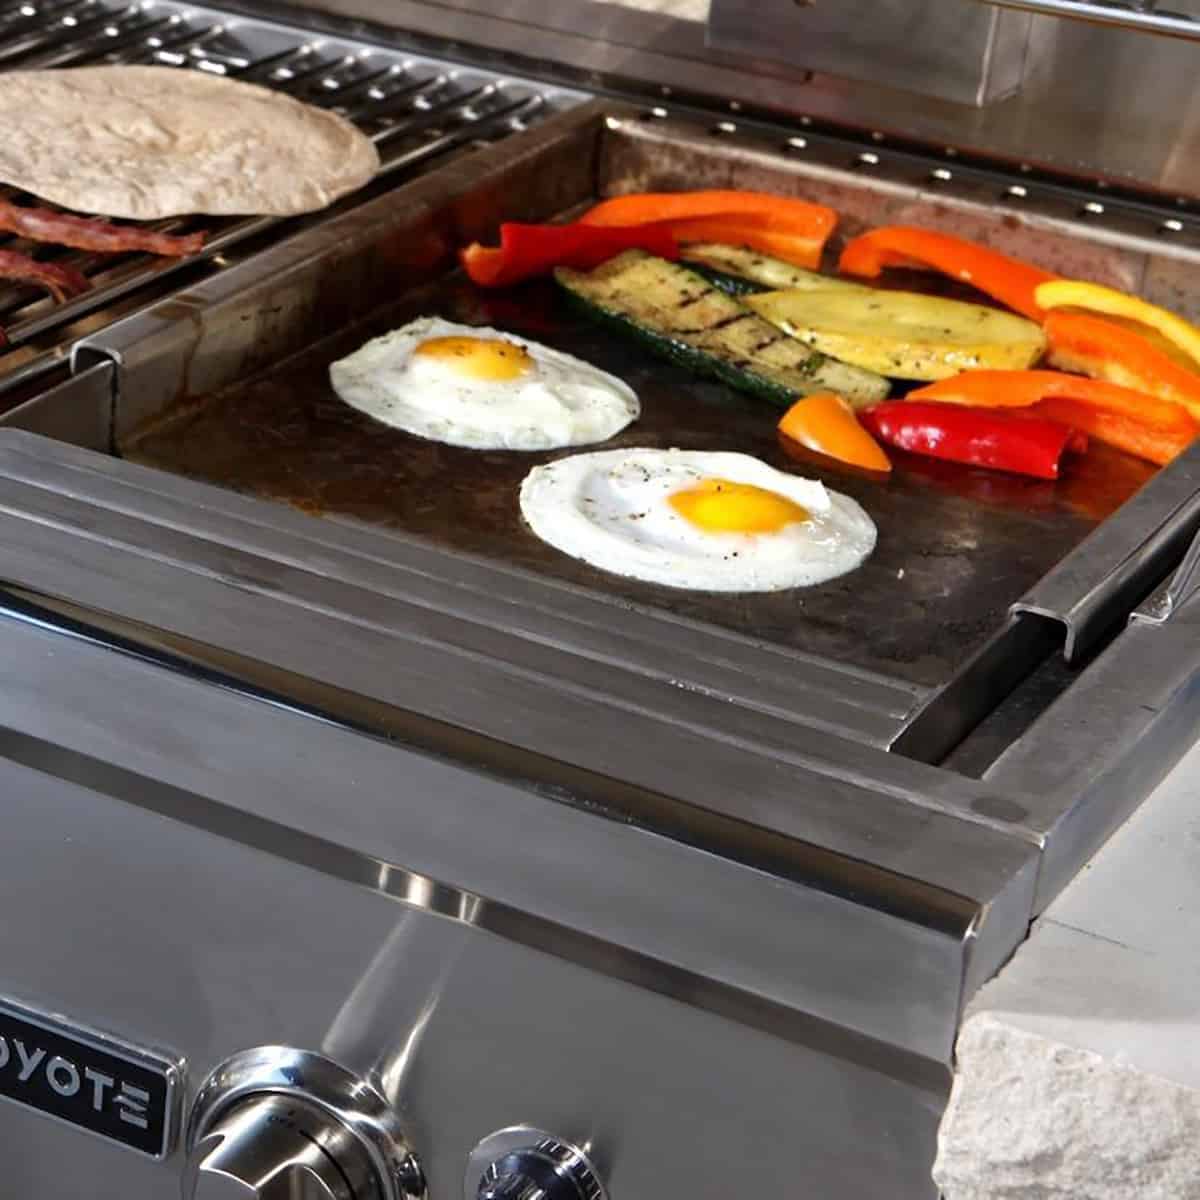 Coyote Heavy Duty Drop-In Griddle For C Series, S Series &amp; Hybrid Grills Griddle with Food Cookiing